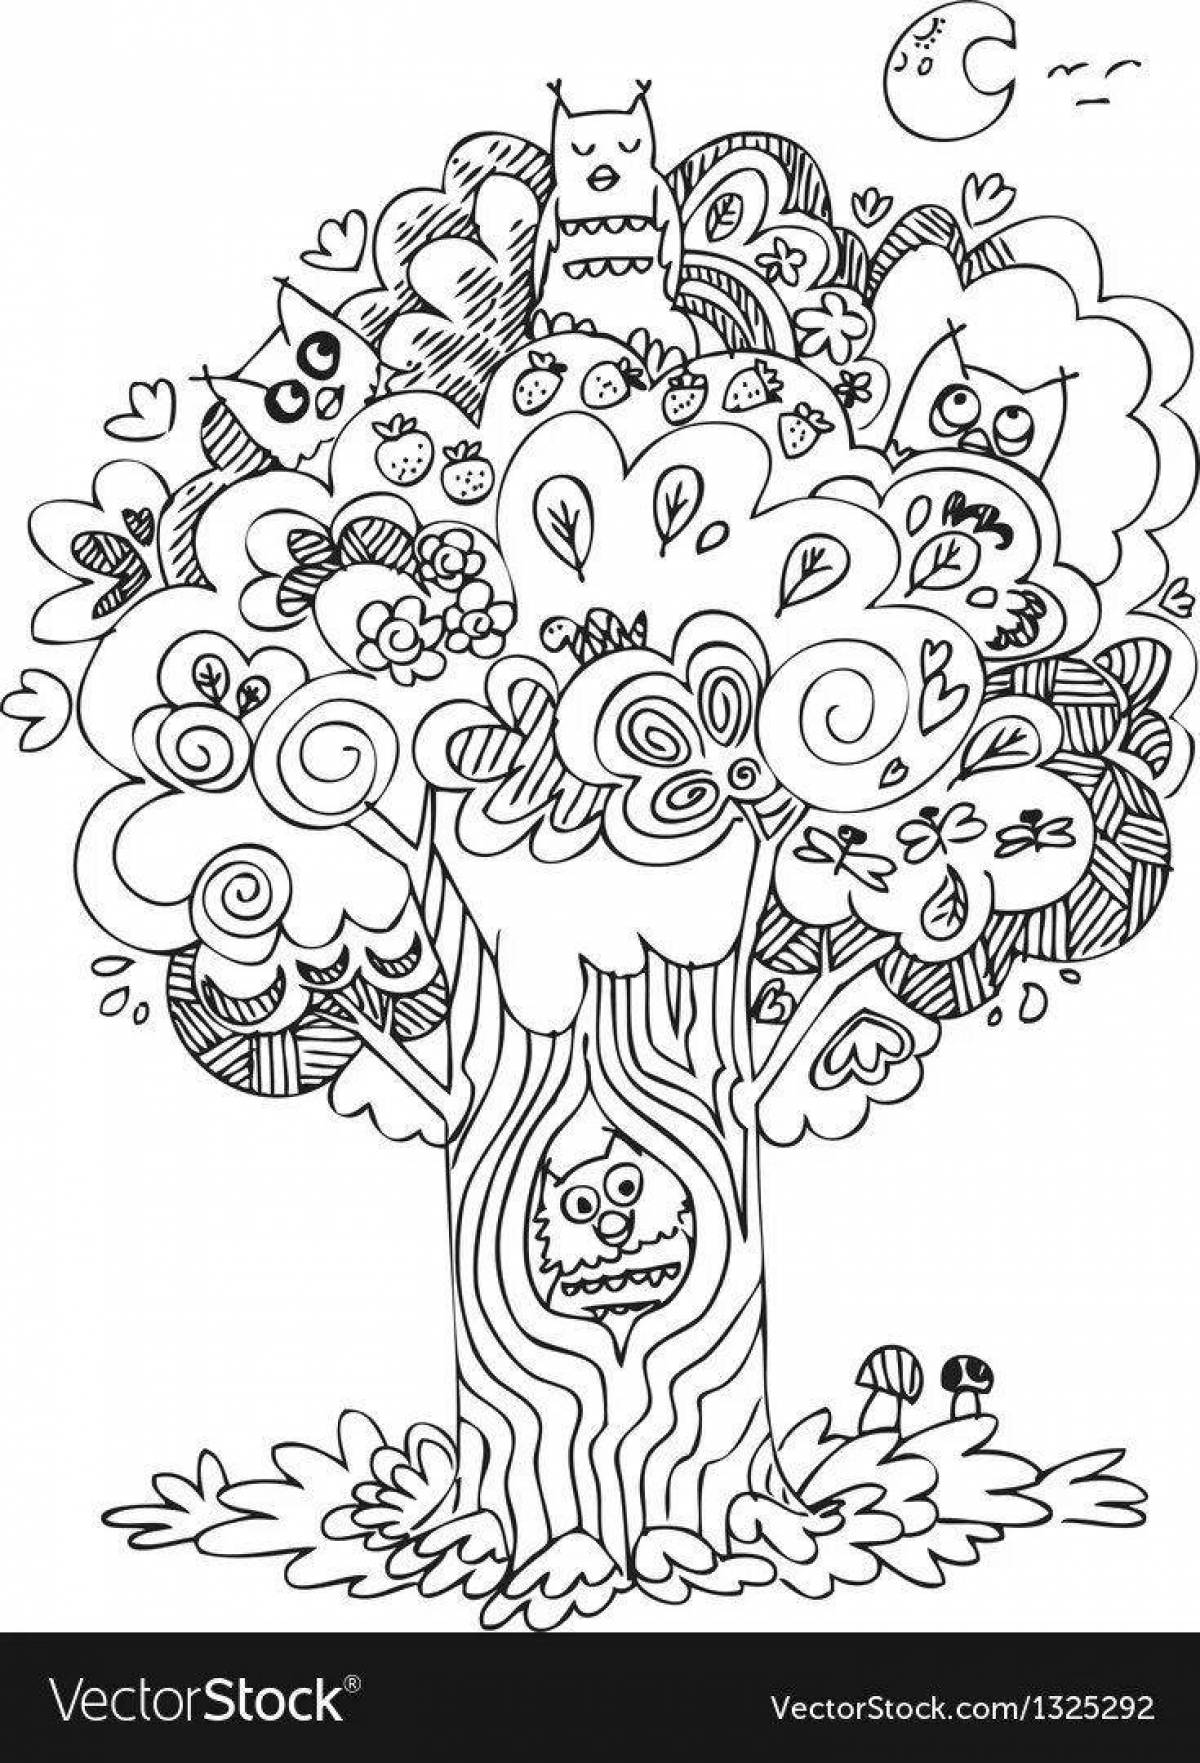 Chukovsky's magnificent miracle tree coloring book